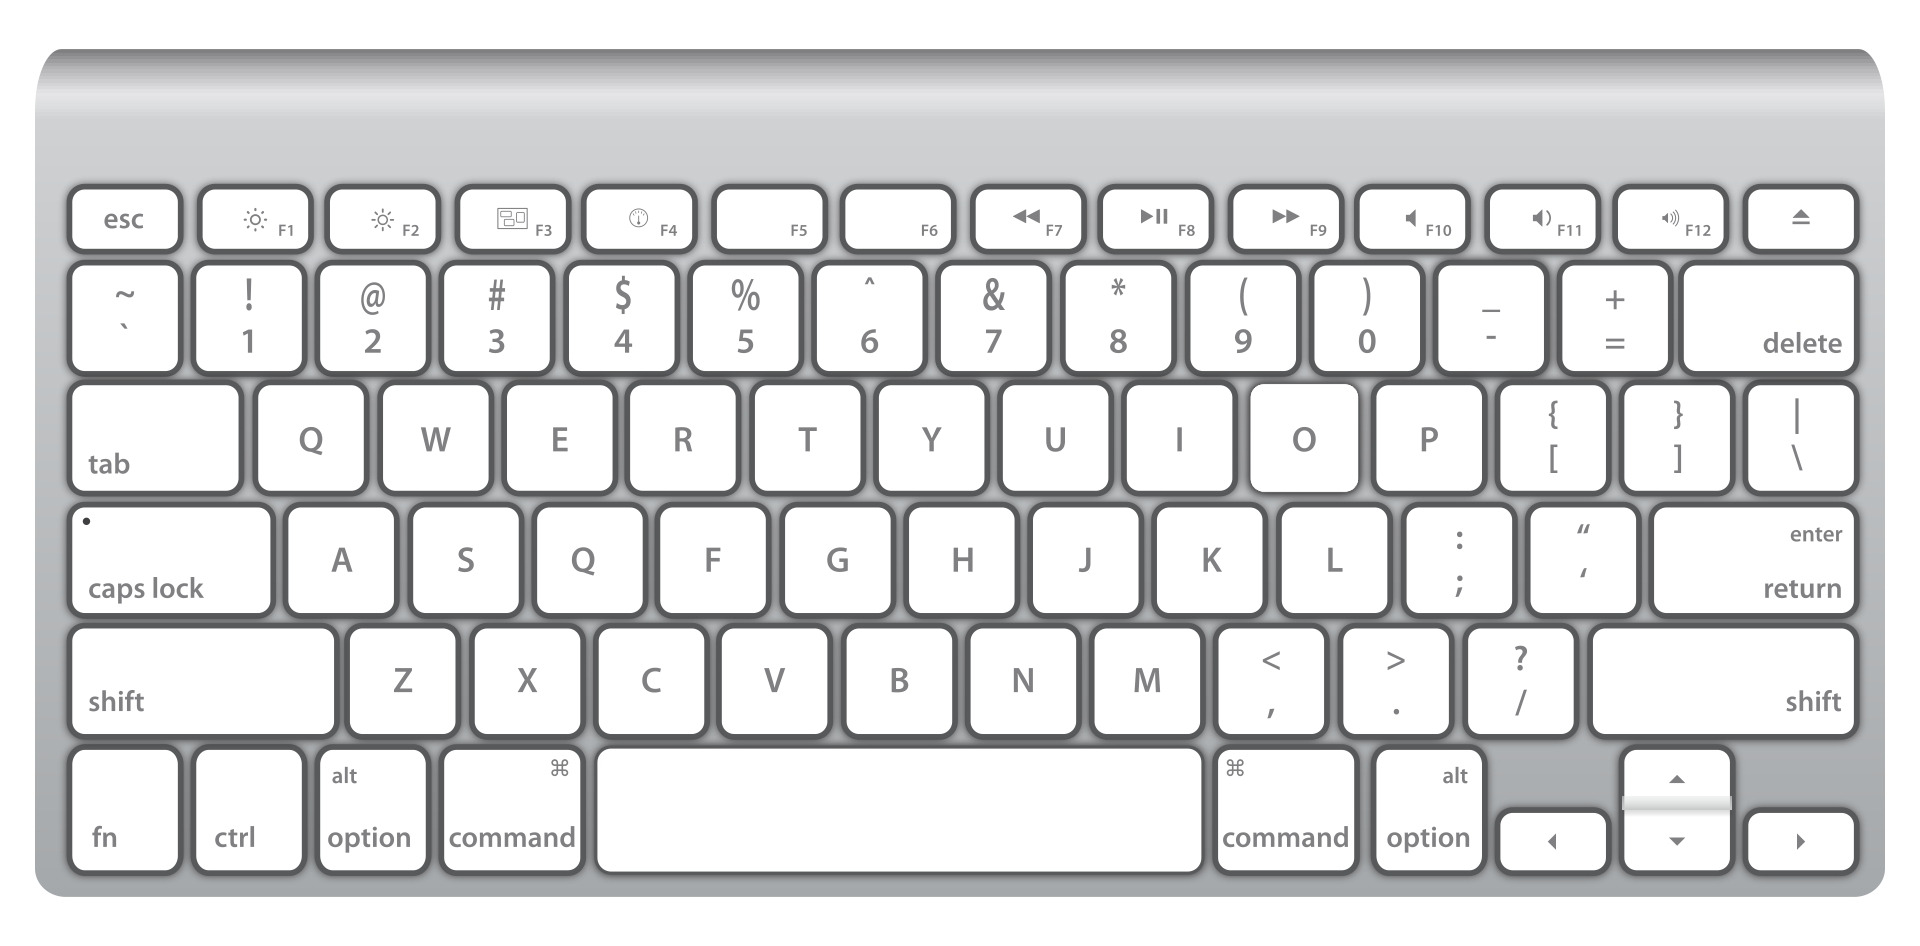 8 Best Images of LPs Printable Keyboard Full Size Printable Computer